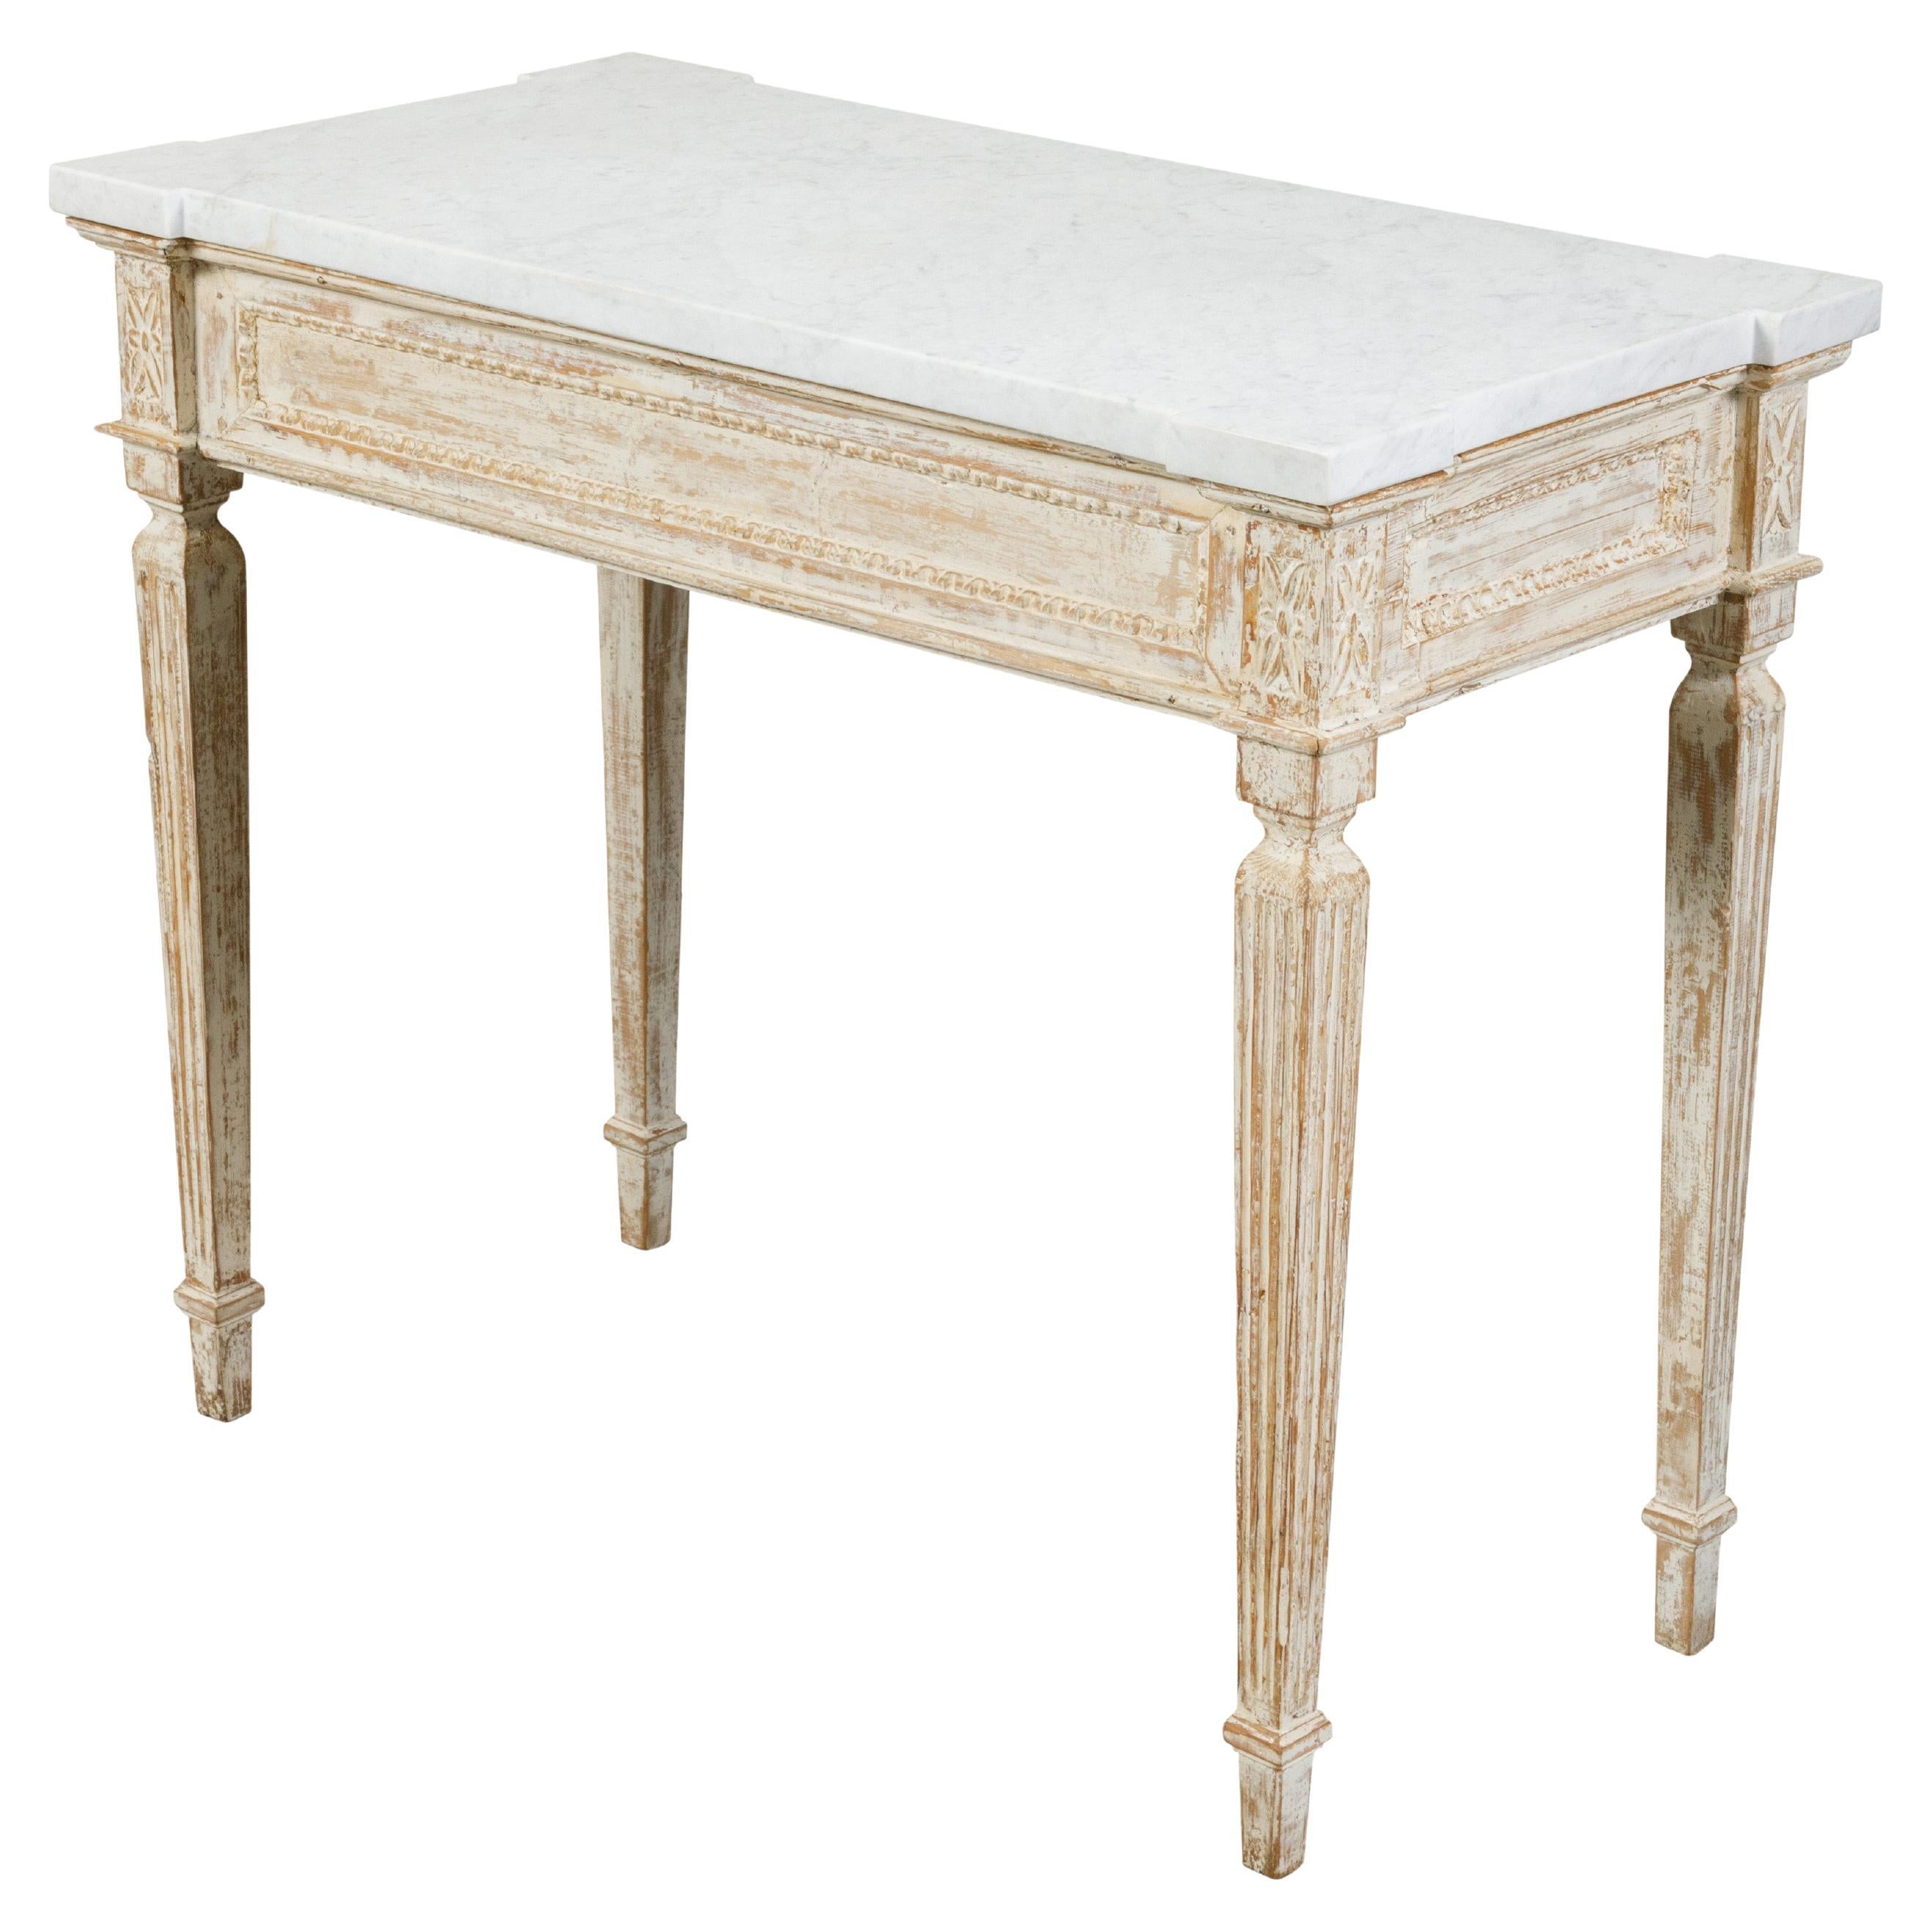 French Neoclassical Style 19th Century Console Table with White Marble Top For Sale